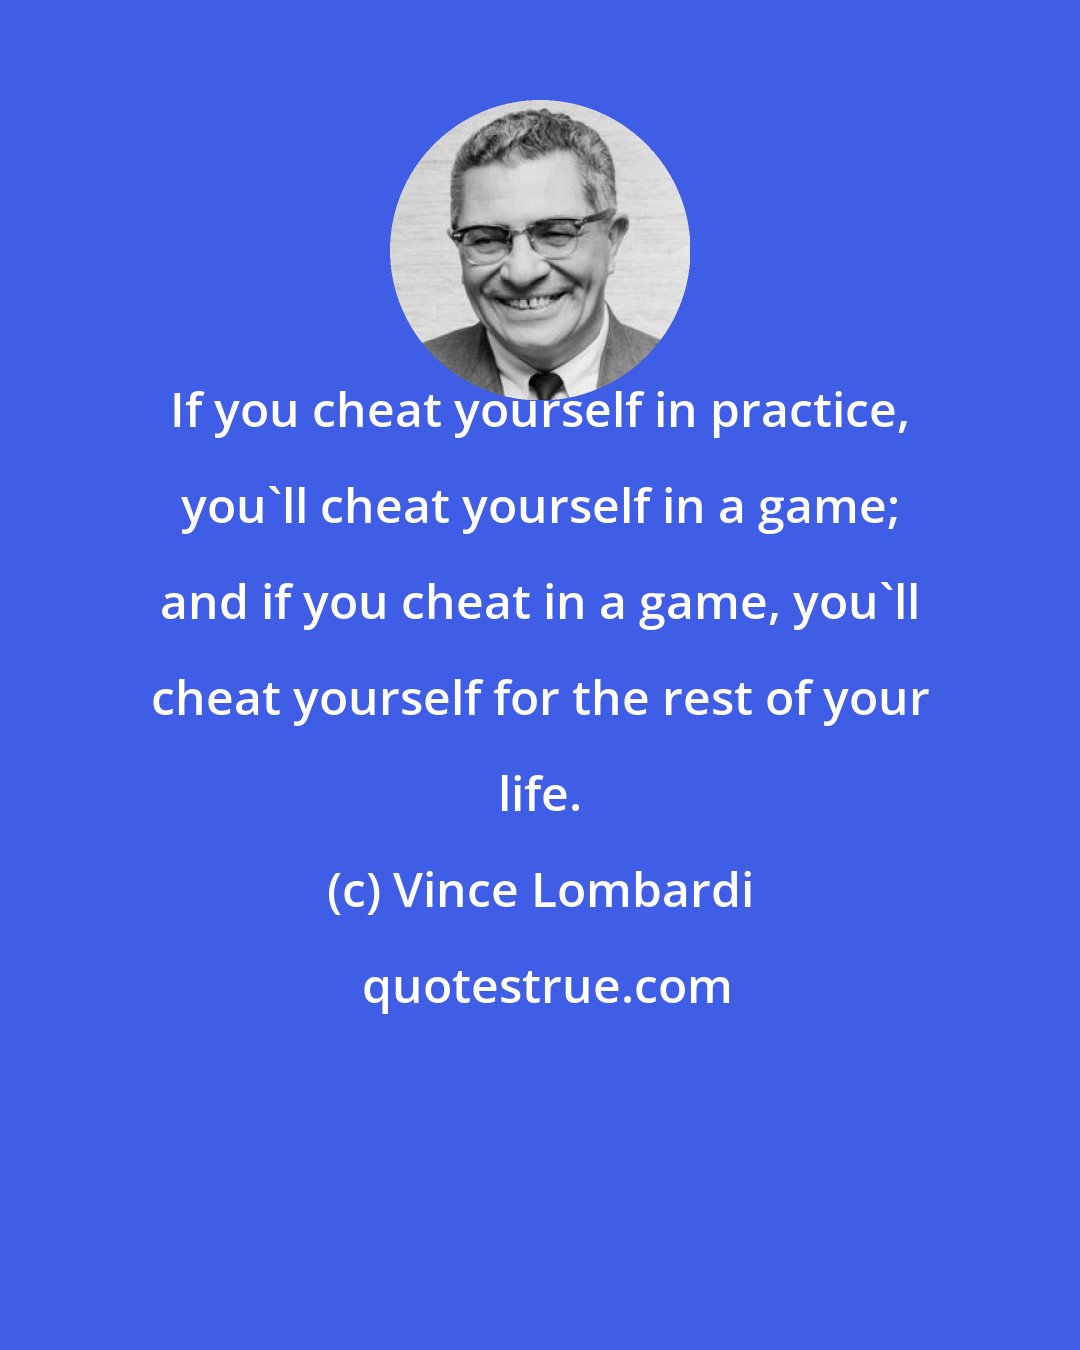 Vince Lombardi: If you cheat yourself in practice, you'll cheat yourself in a game; and if you cheat in a game, you'll cheat yourself for the rest of your life.